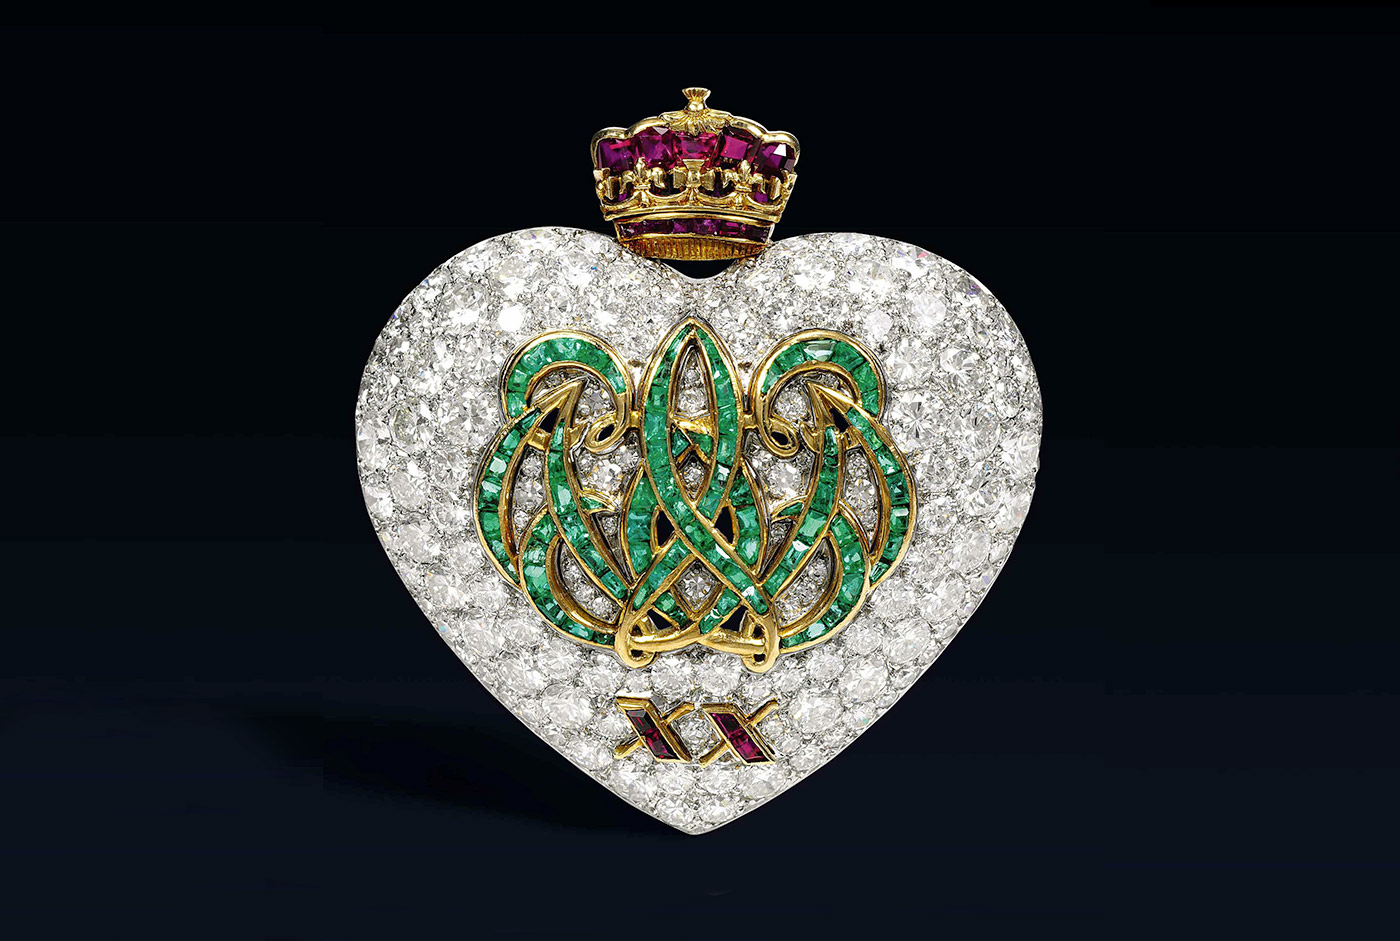 Wallis Simpson's heart motif brooch with diamonds, emeralds and rubies in yellow gold